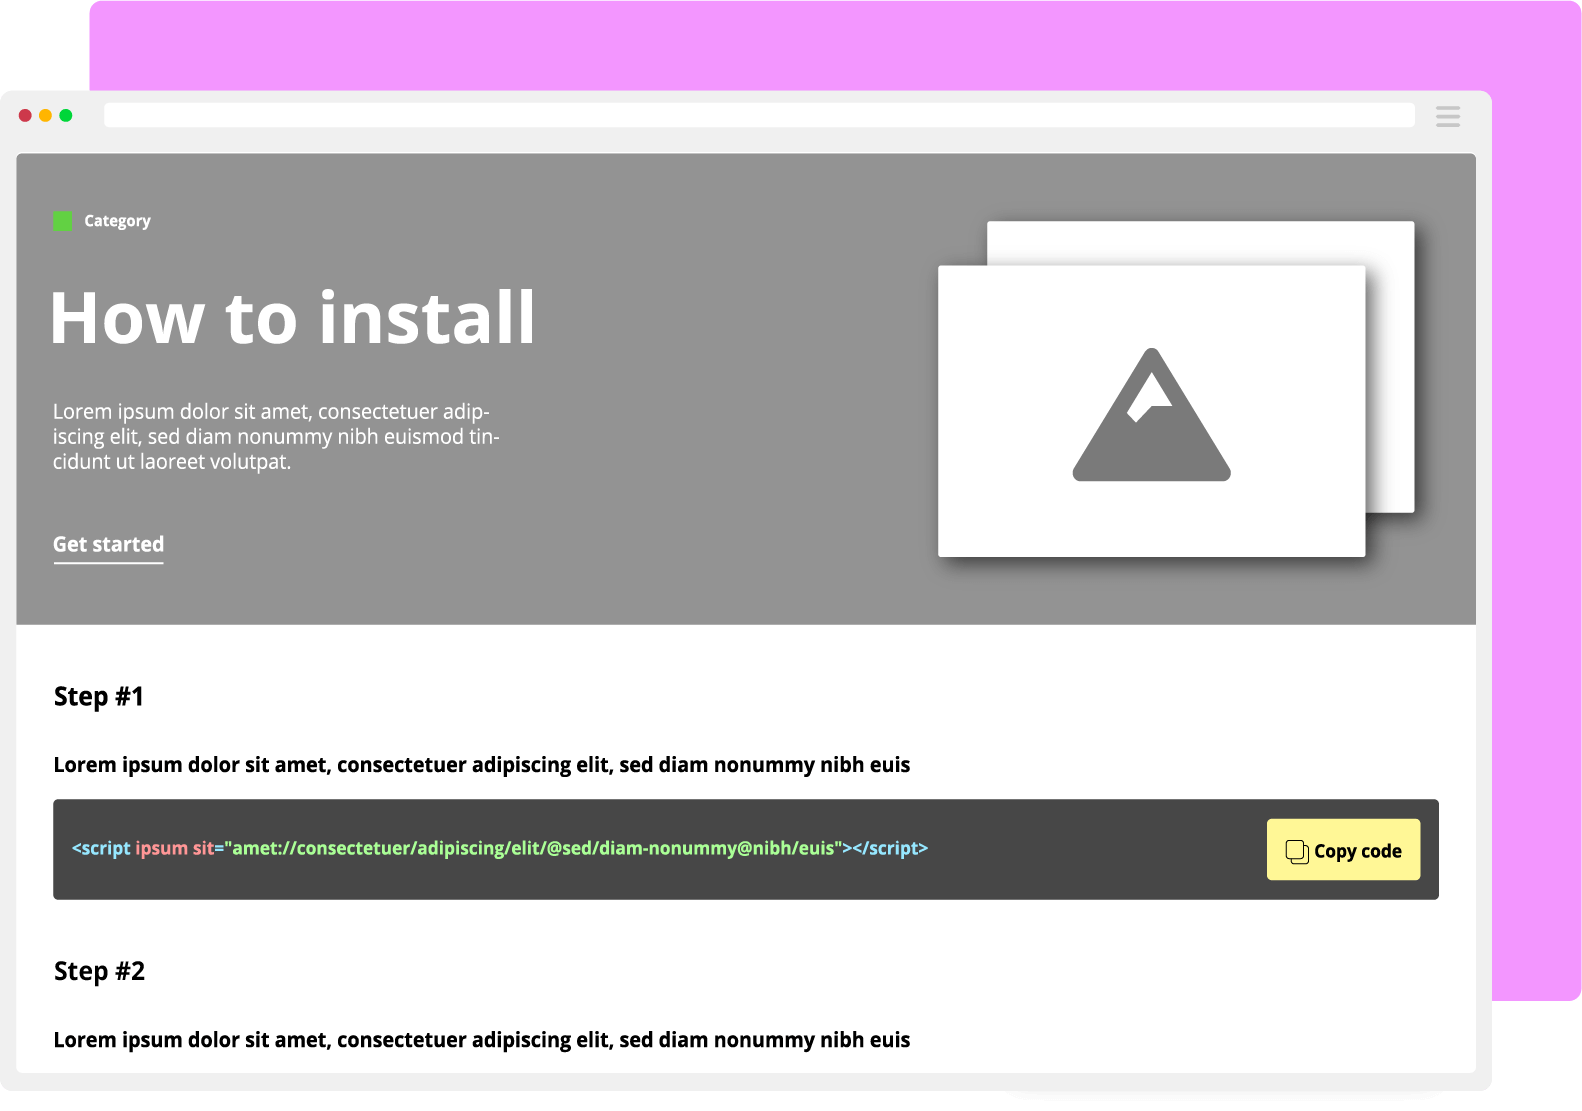 A digital minimalist mockup of the Documentation page with a pink outlined background